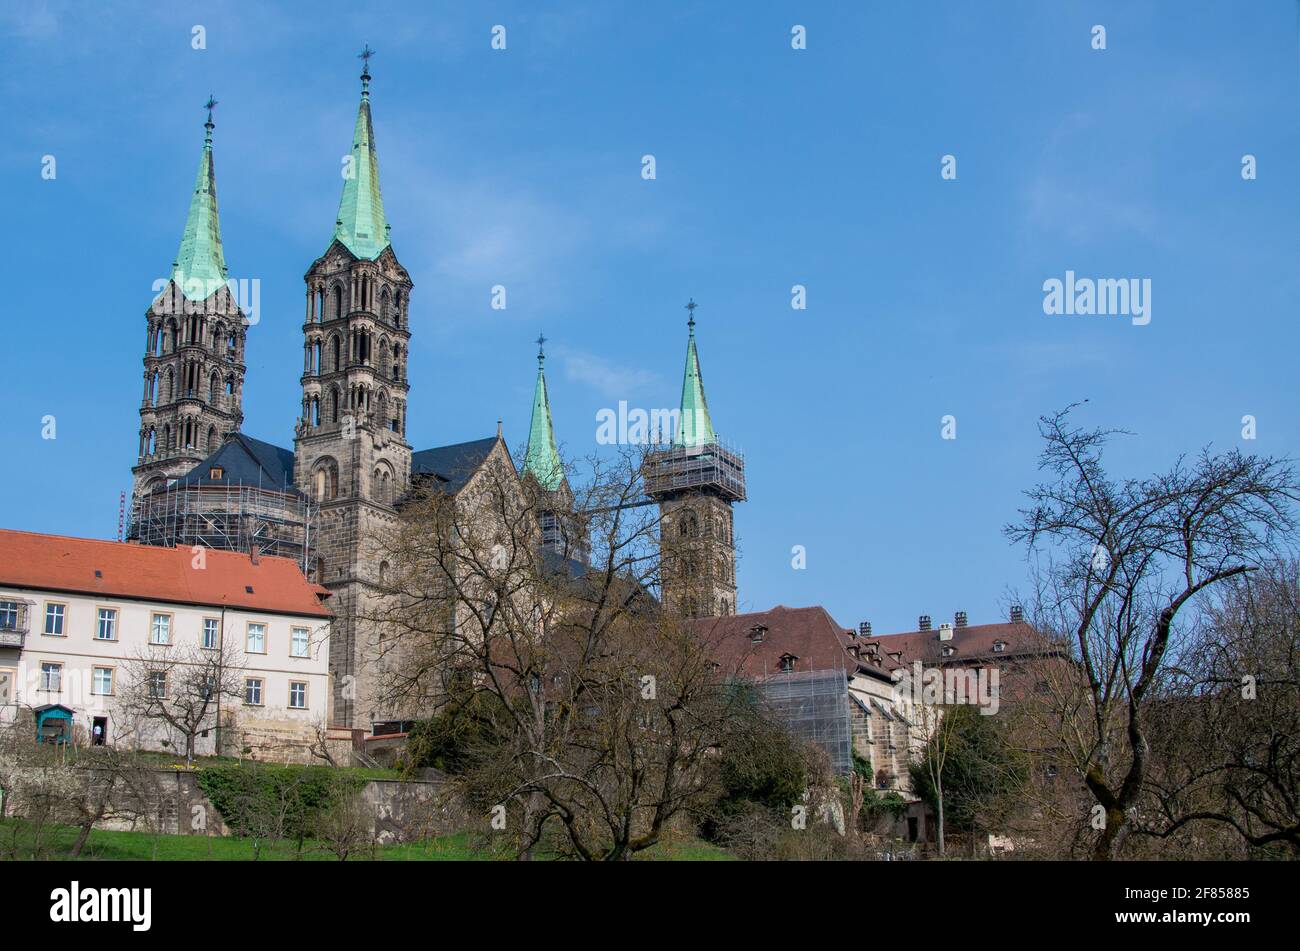 The Bamberg Cathedral in the World Heritage city of Bamberg, Germany, photographed from the cathedral ground. Stock Photo